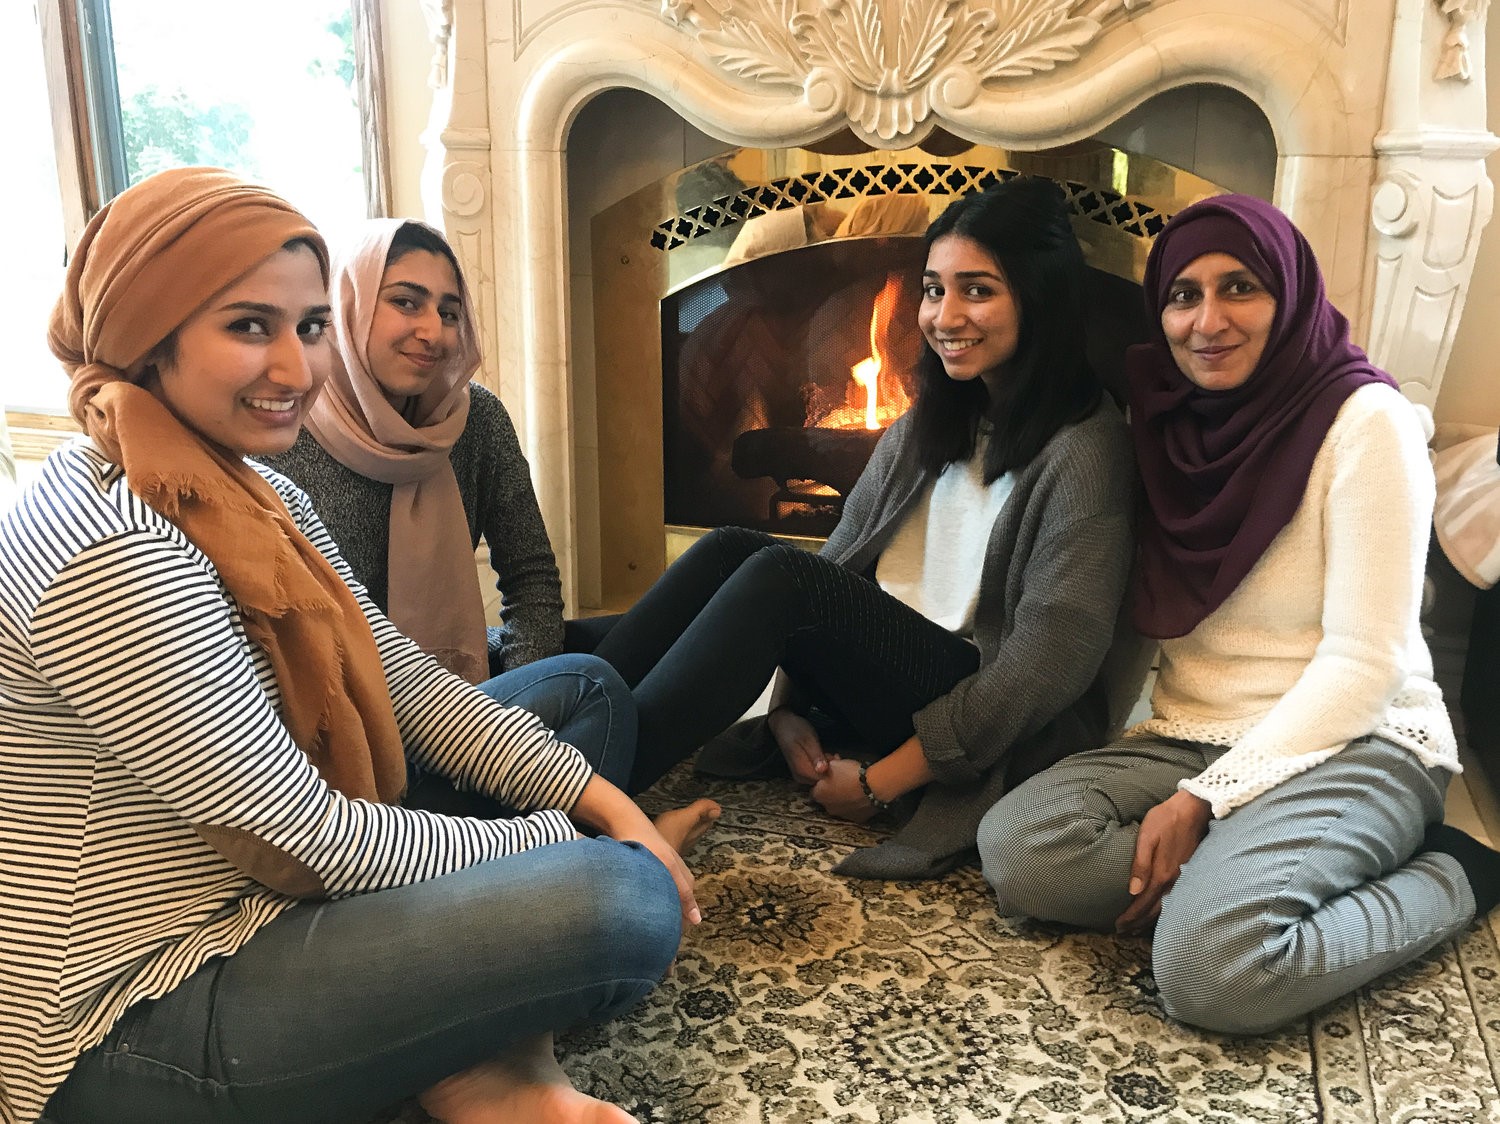 Bullied For Its Faith, Muslim Family Fights Back Through Education